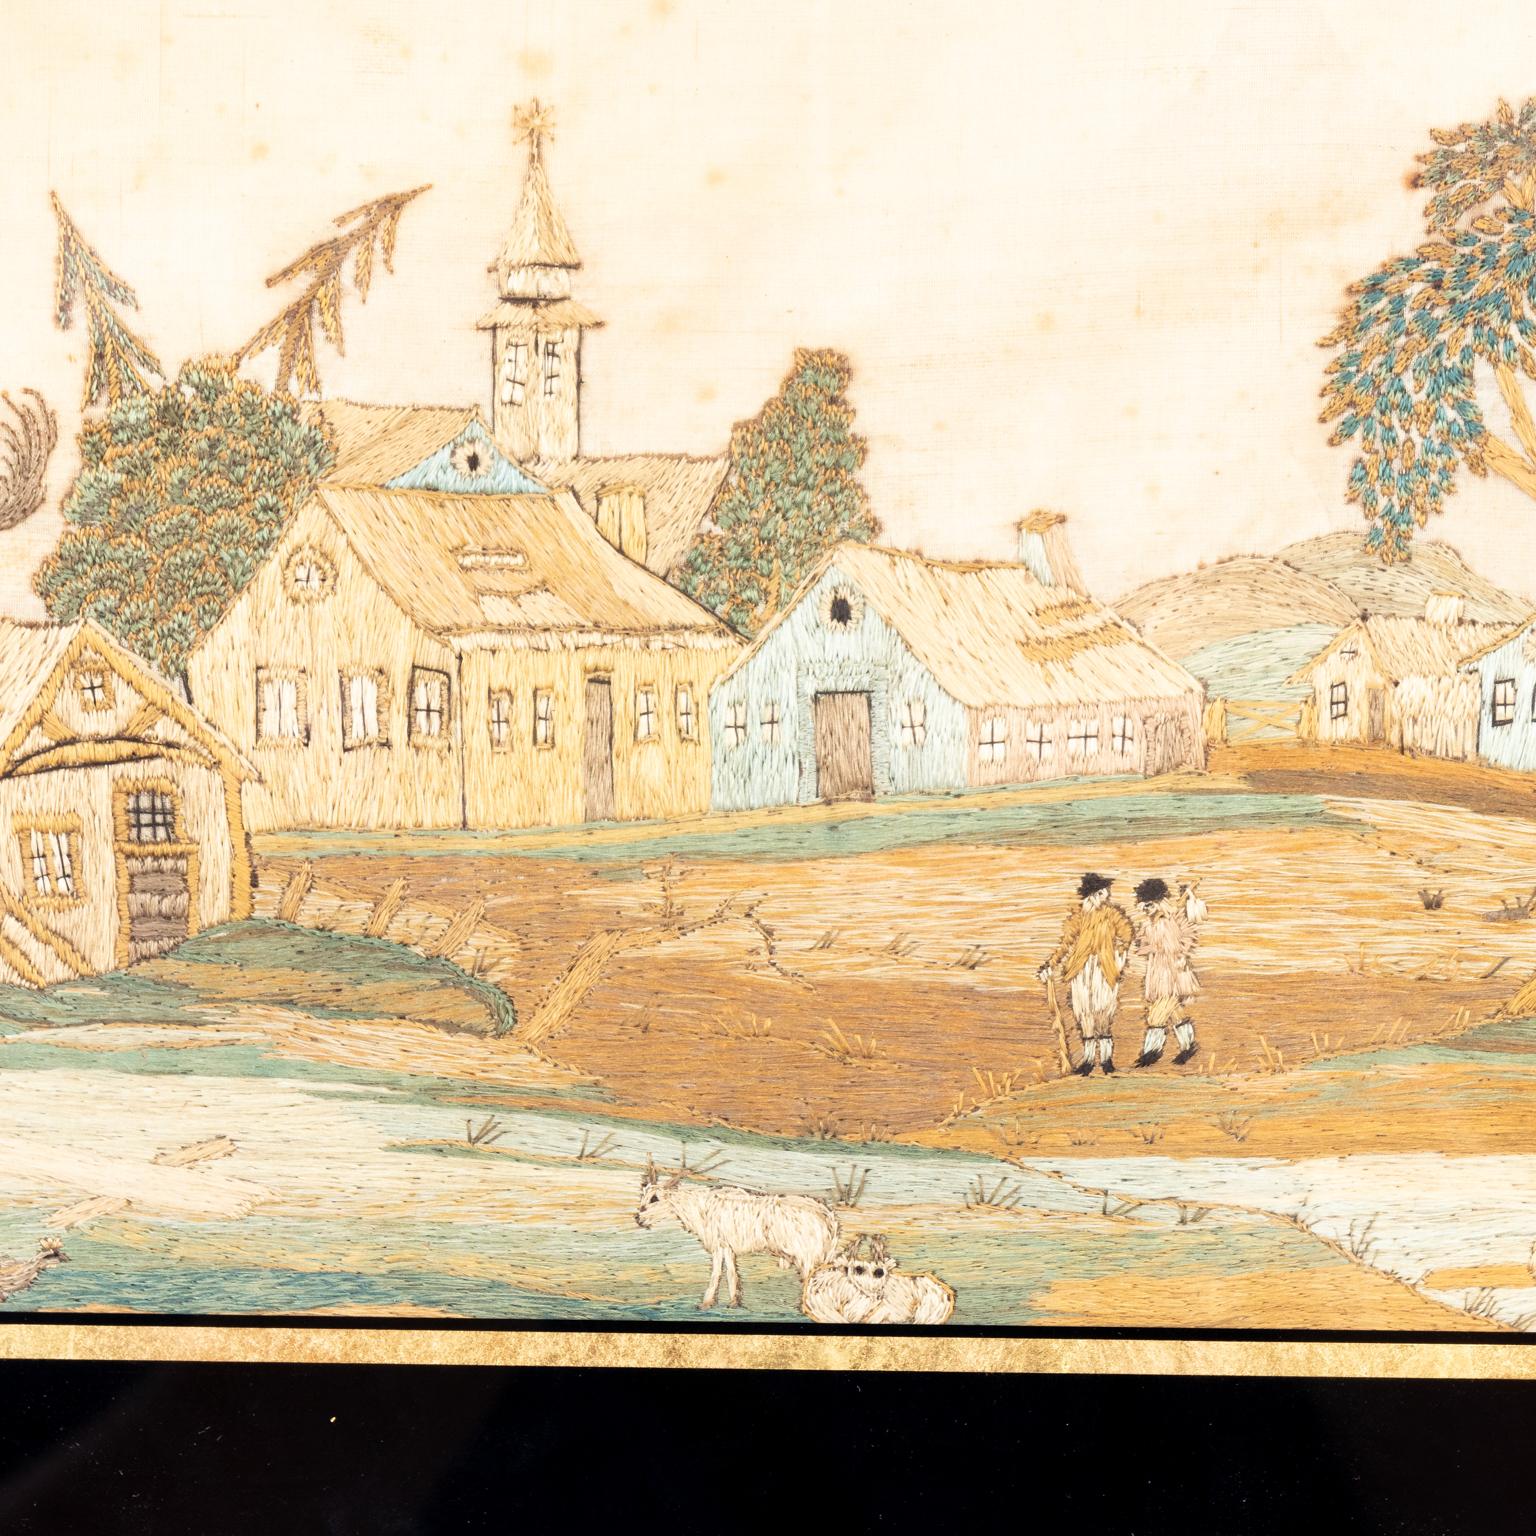 Circa 1825 Georgian style silk embroidered country scene in gilt frame detailed with two figures and two sheep in the foreground framed by rustic buildings and a steepled church in the background. Made in England. Please note of wear consistent with